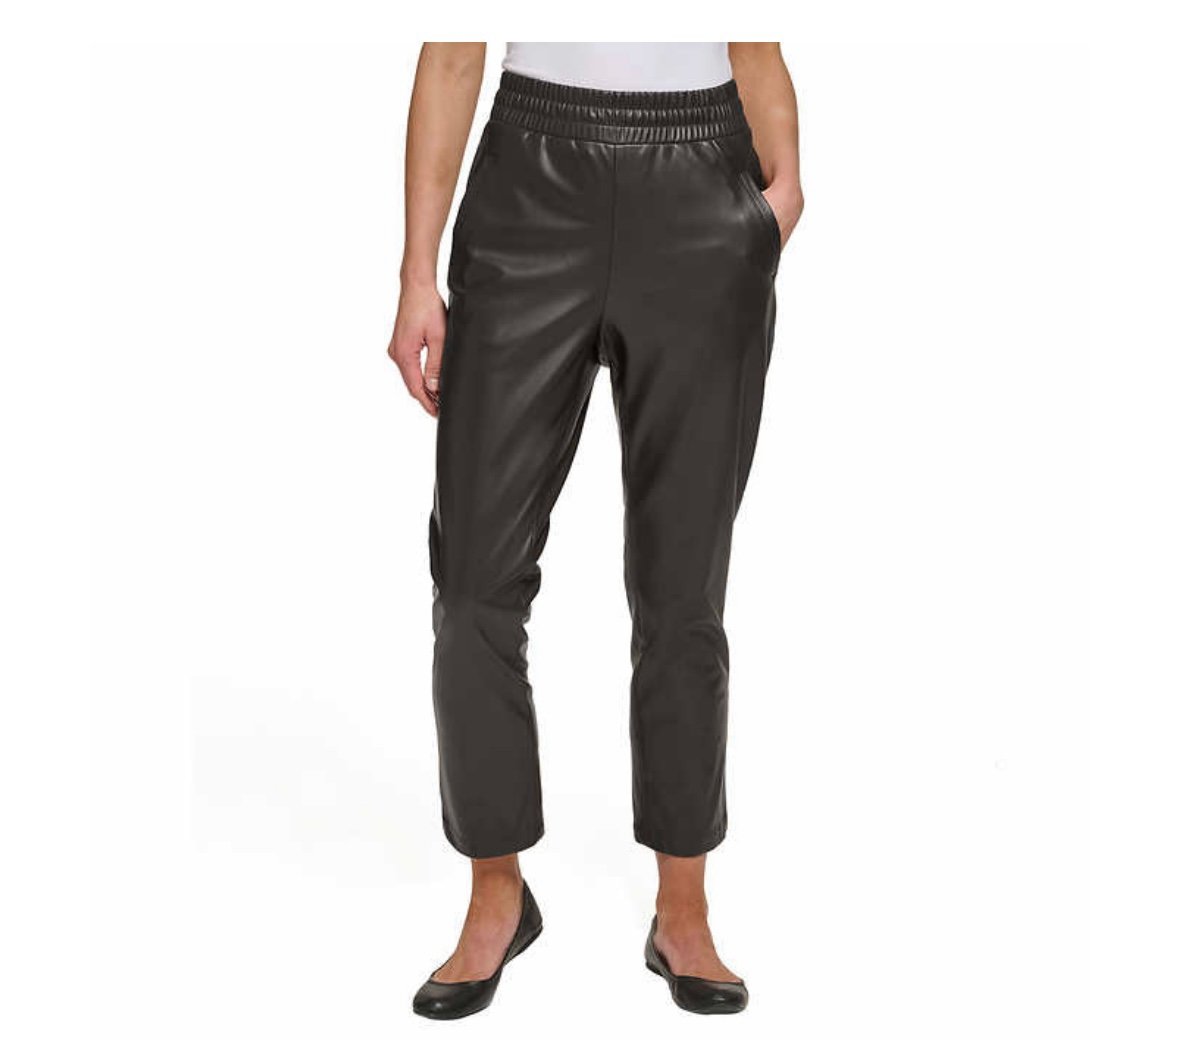 where to buy  DKNY Ladies Faux Leather Pants j89qxt4RB just buy it